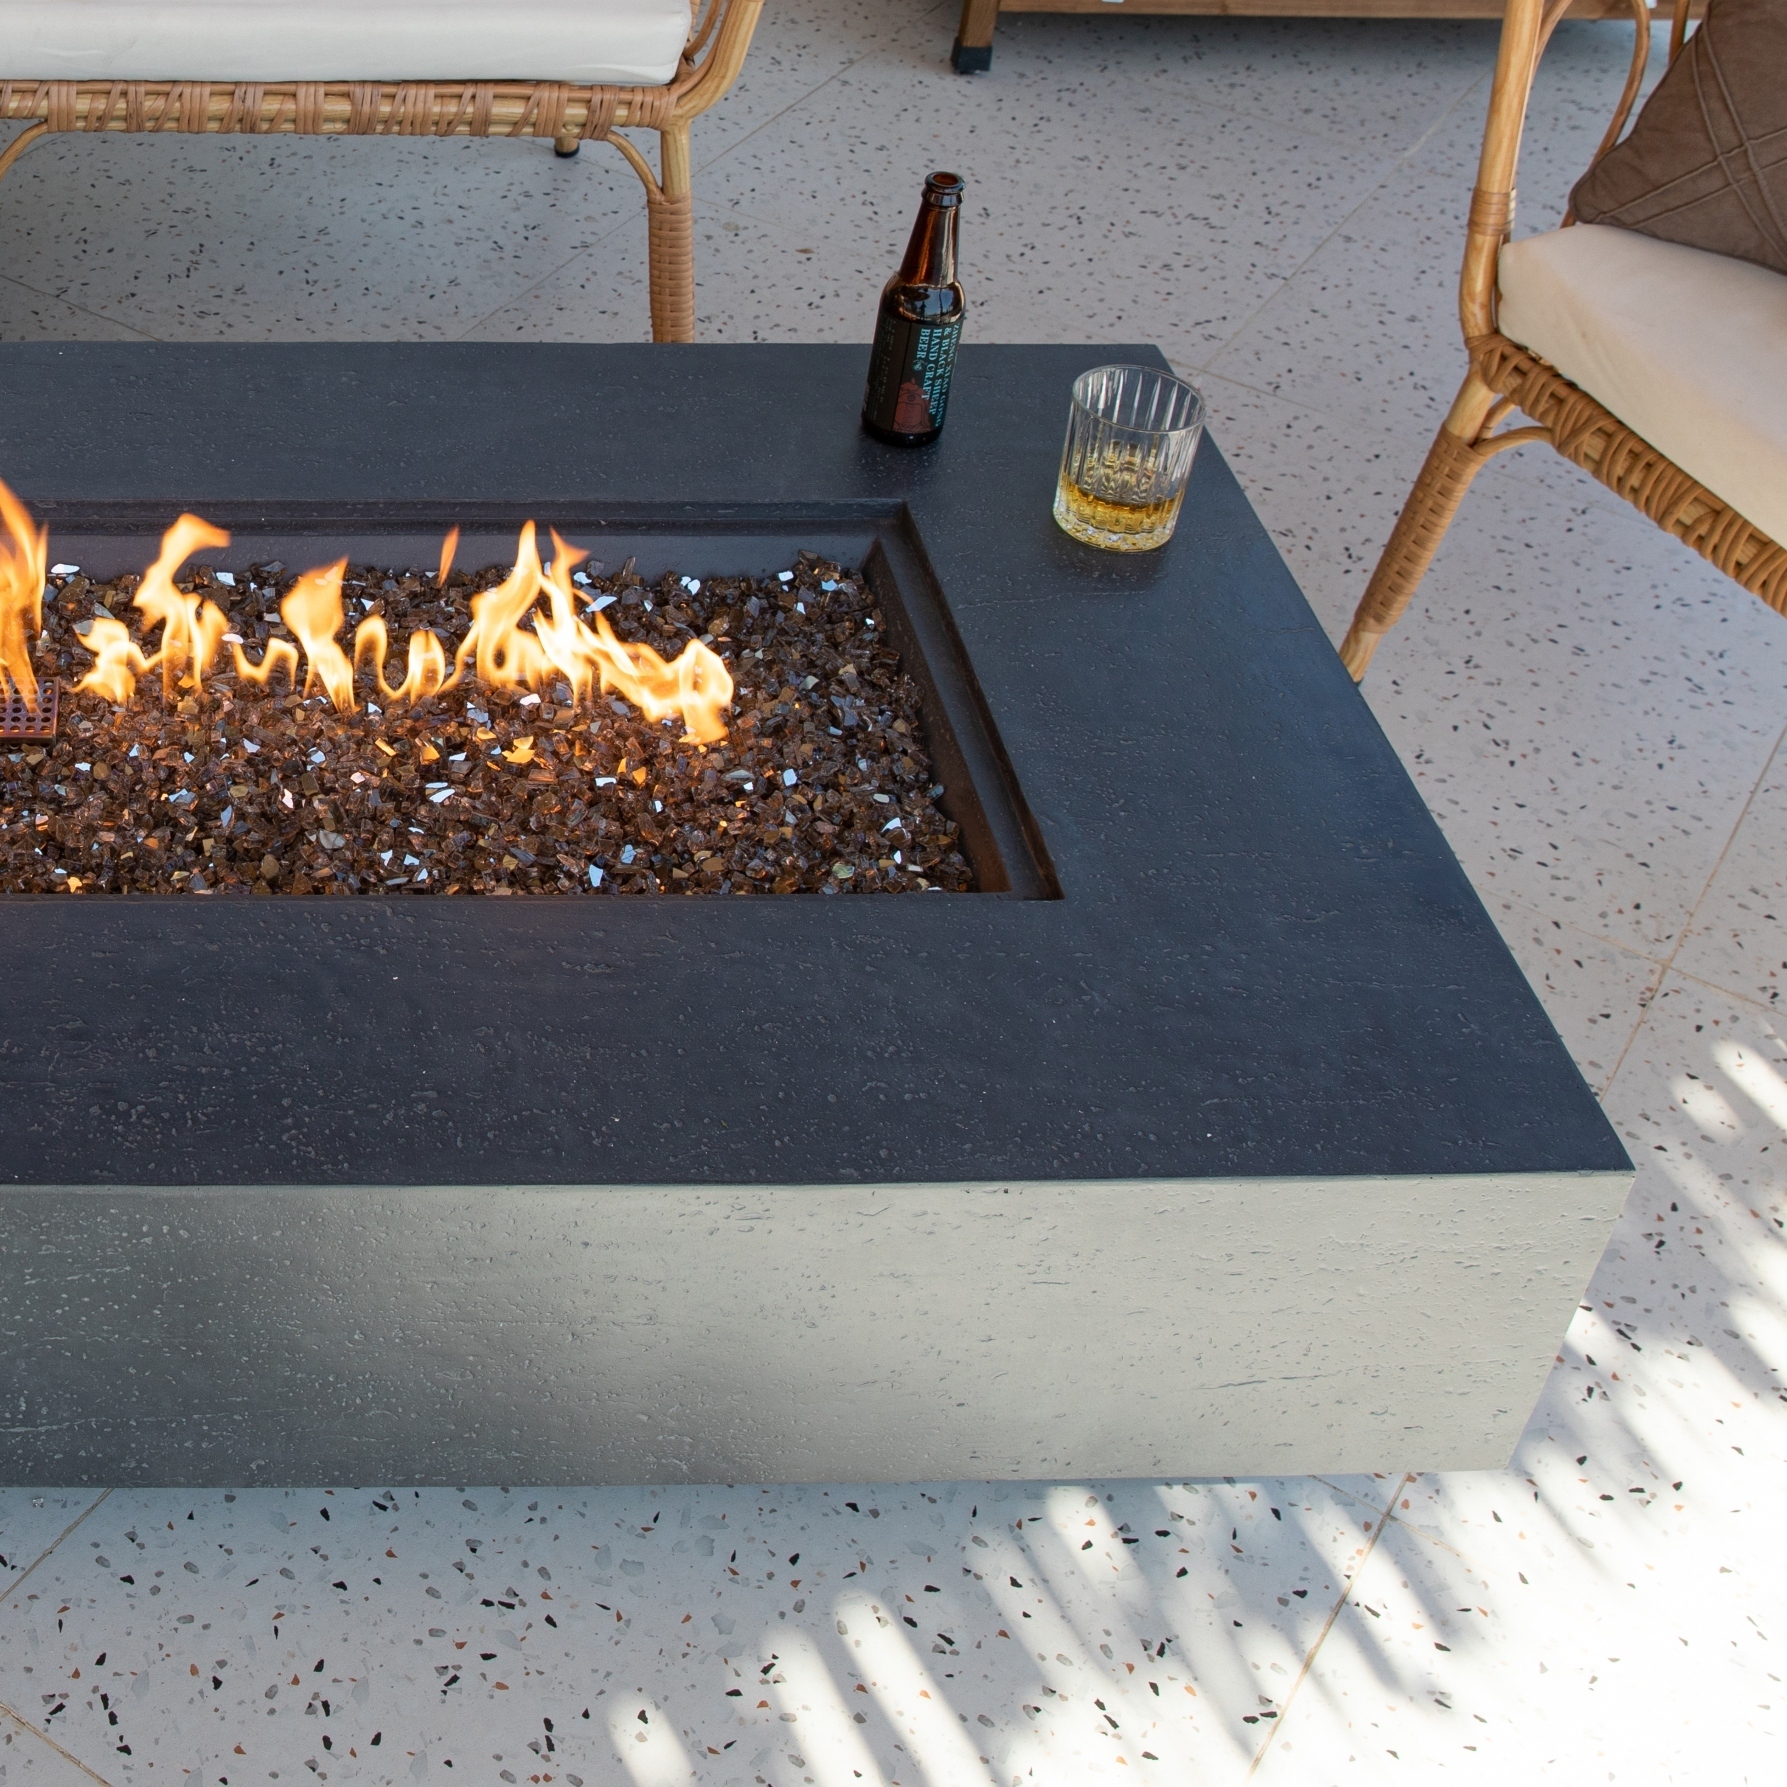 Positano firepit from suns lifestyle